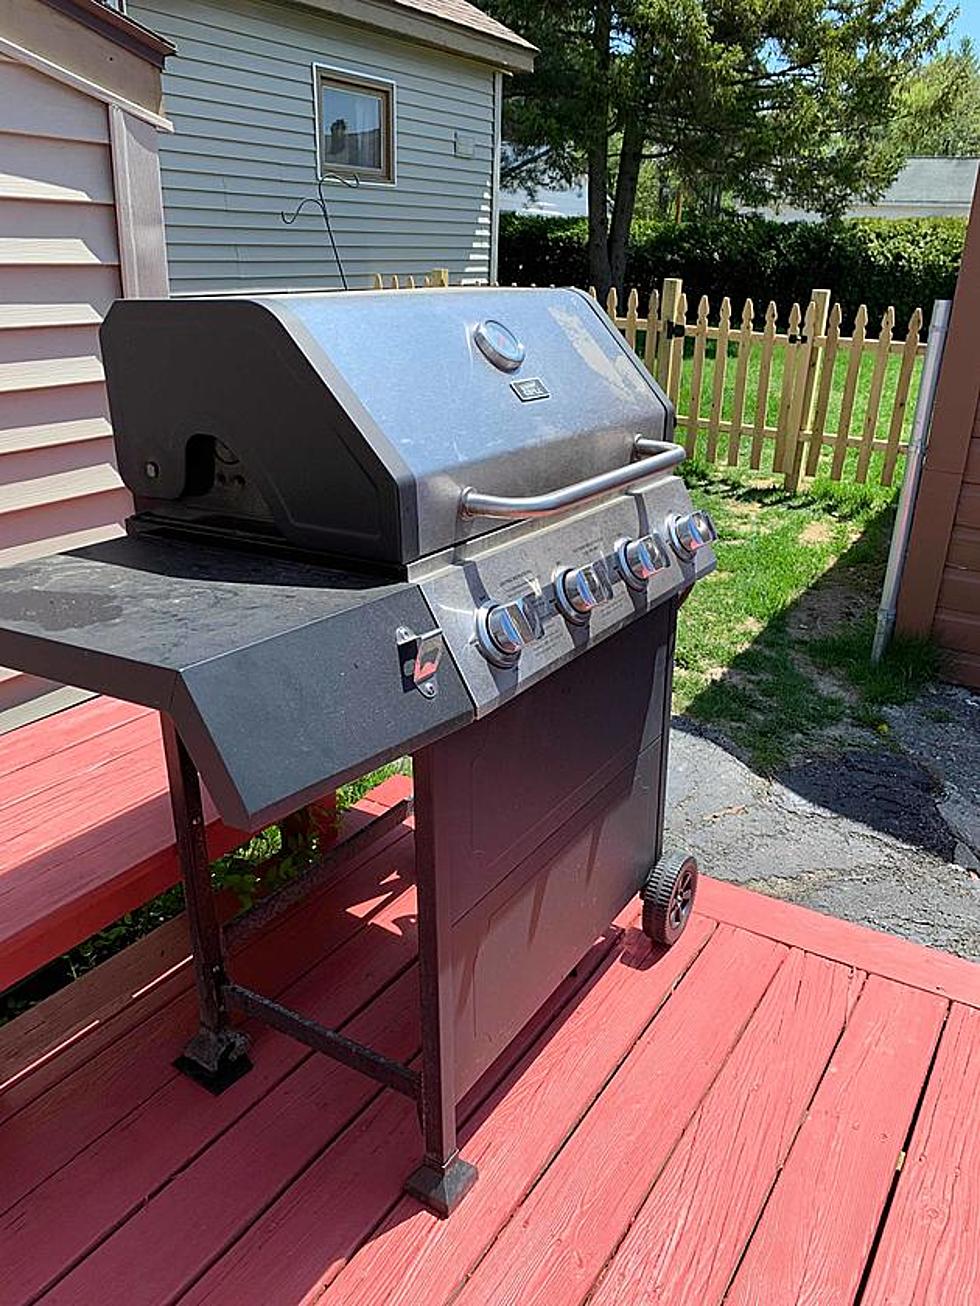 ‘Worst Grill Ever’ Is Best Bangor Marketplace Post Ever